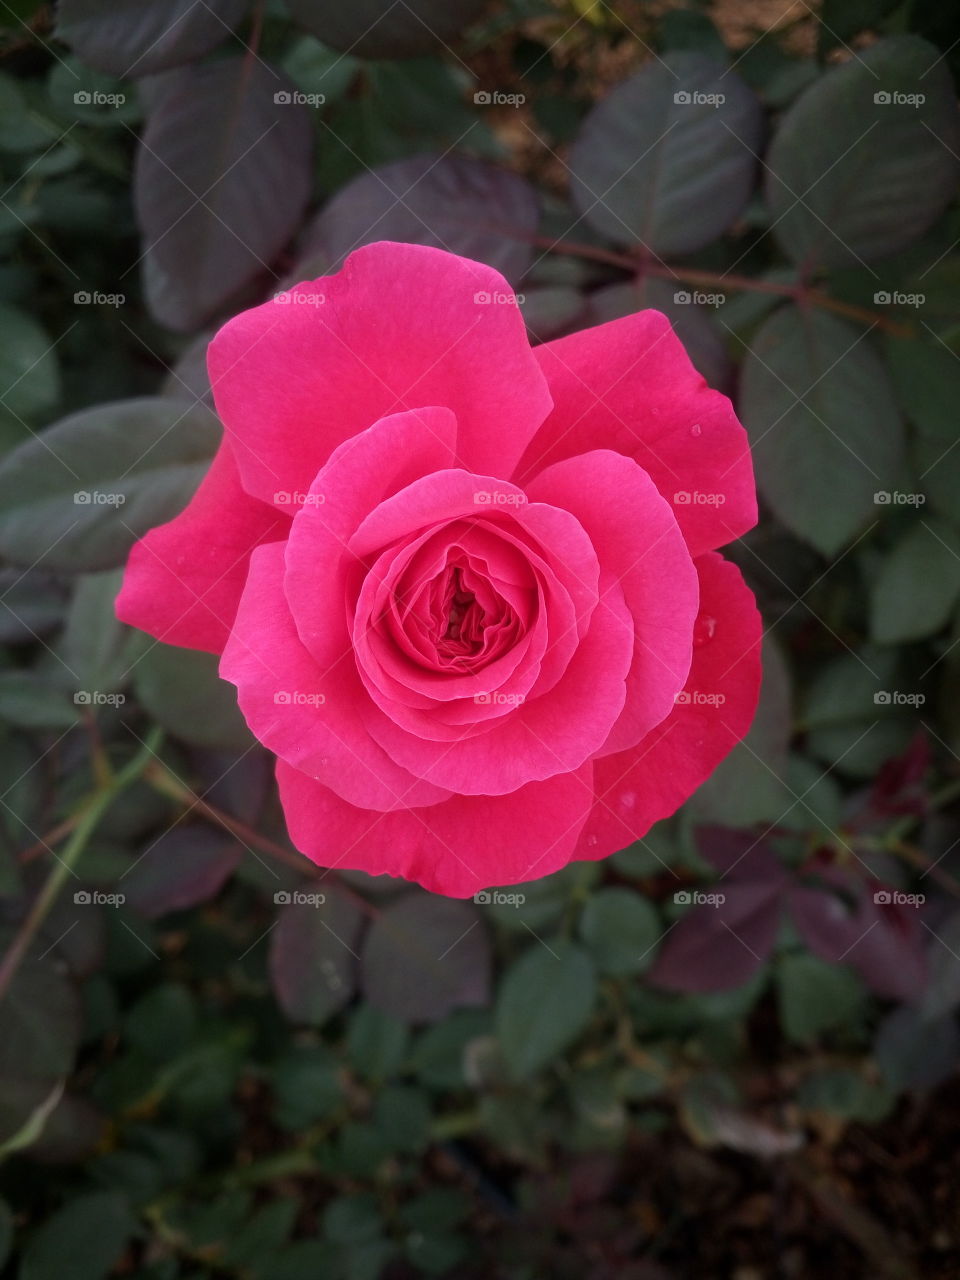 the most beautiful symbol of love and romance flower rose in my garden thick pink color